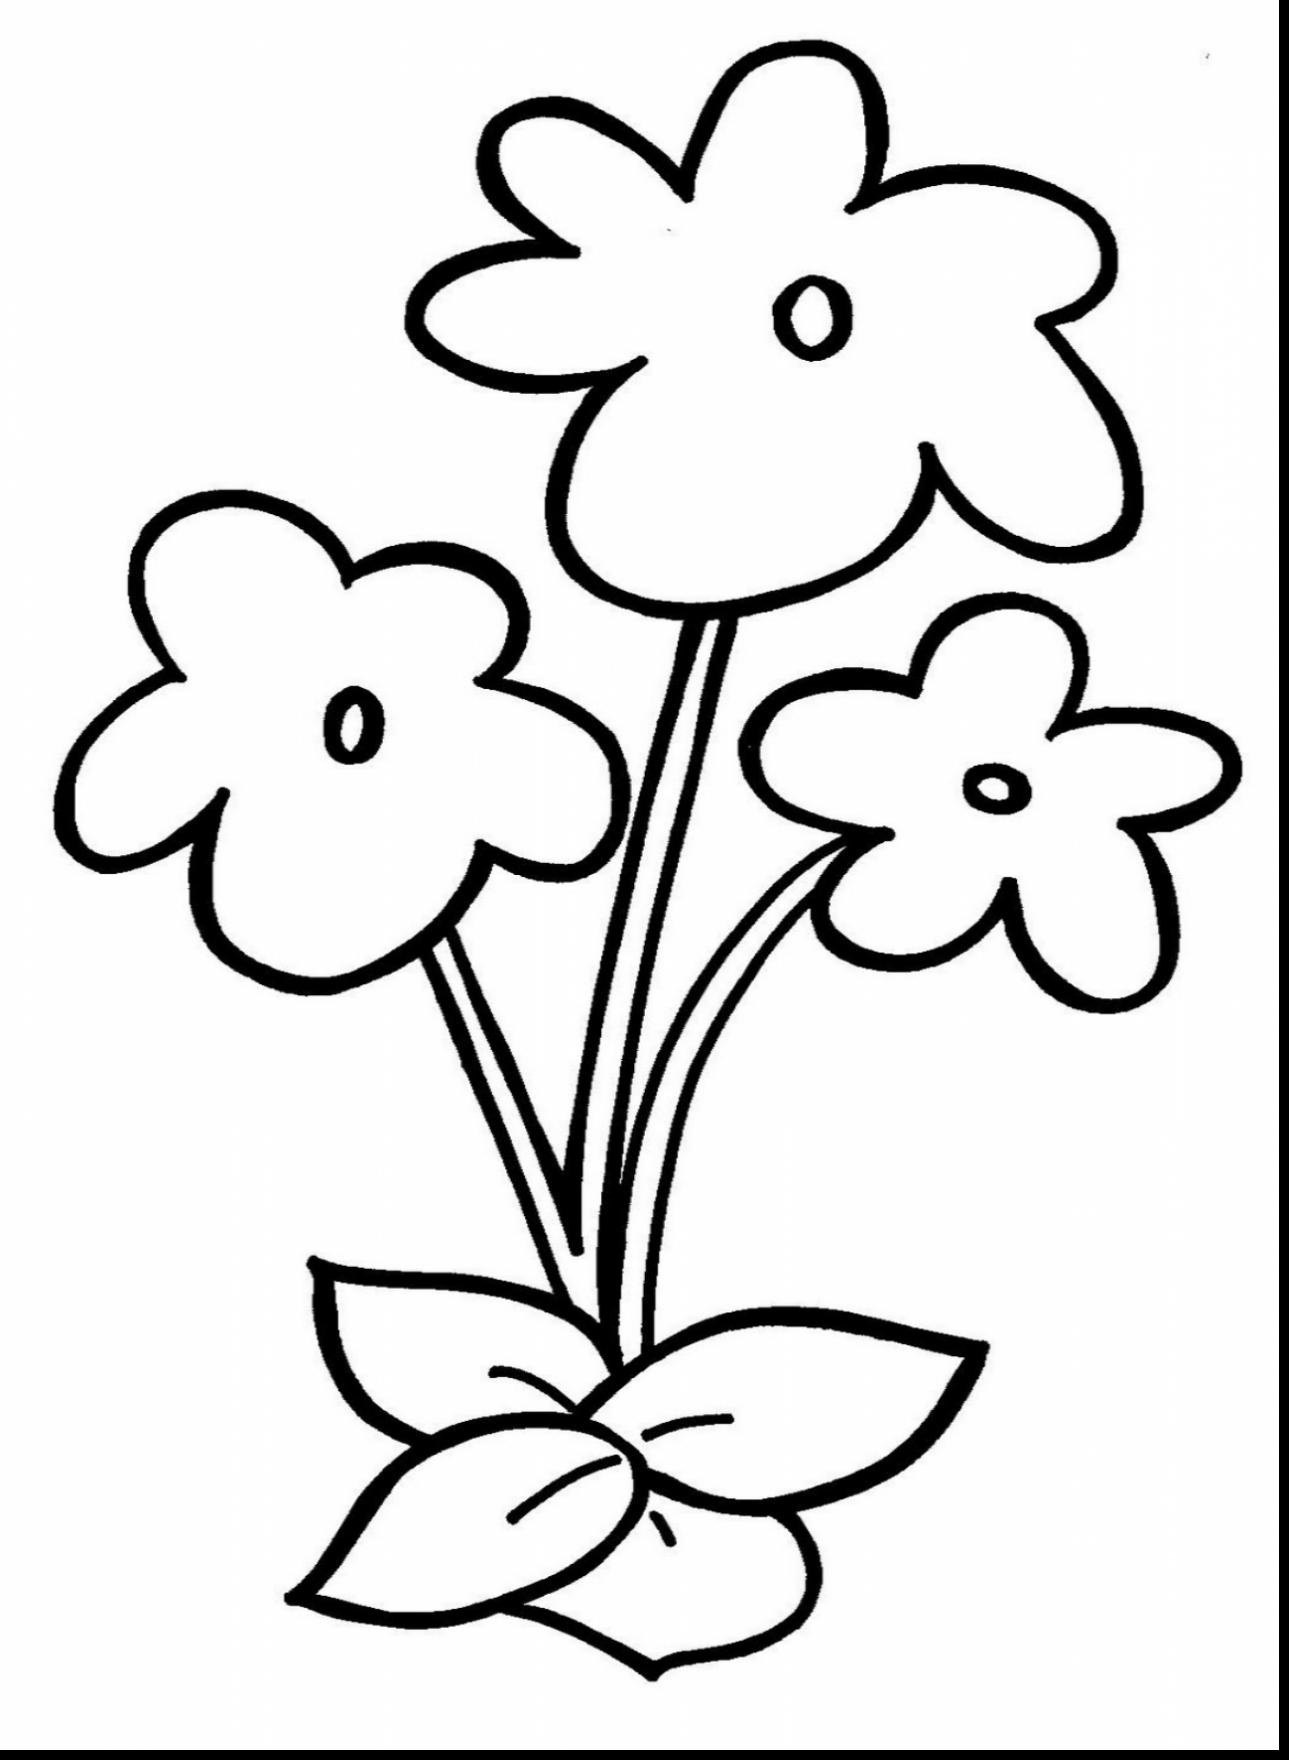 Easy Flower Coloring Pages at GetDrawings | Free download